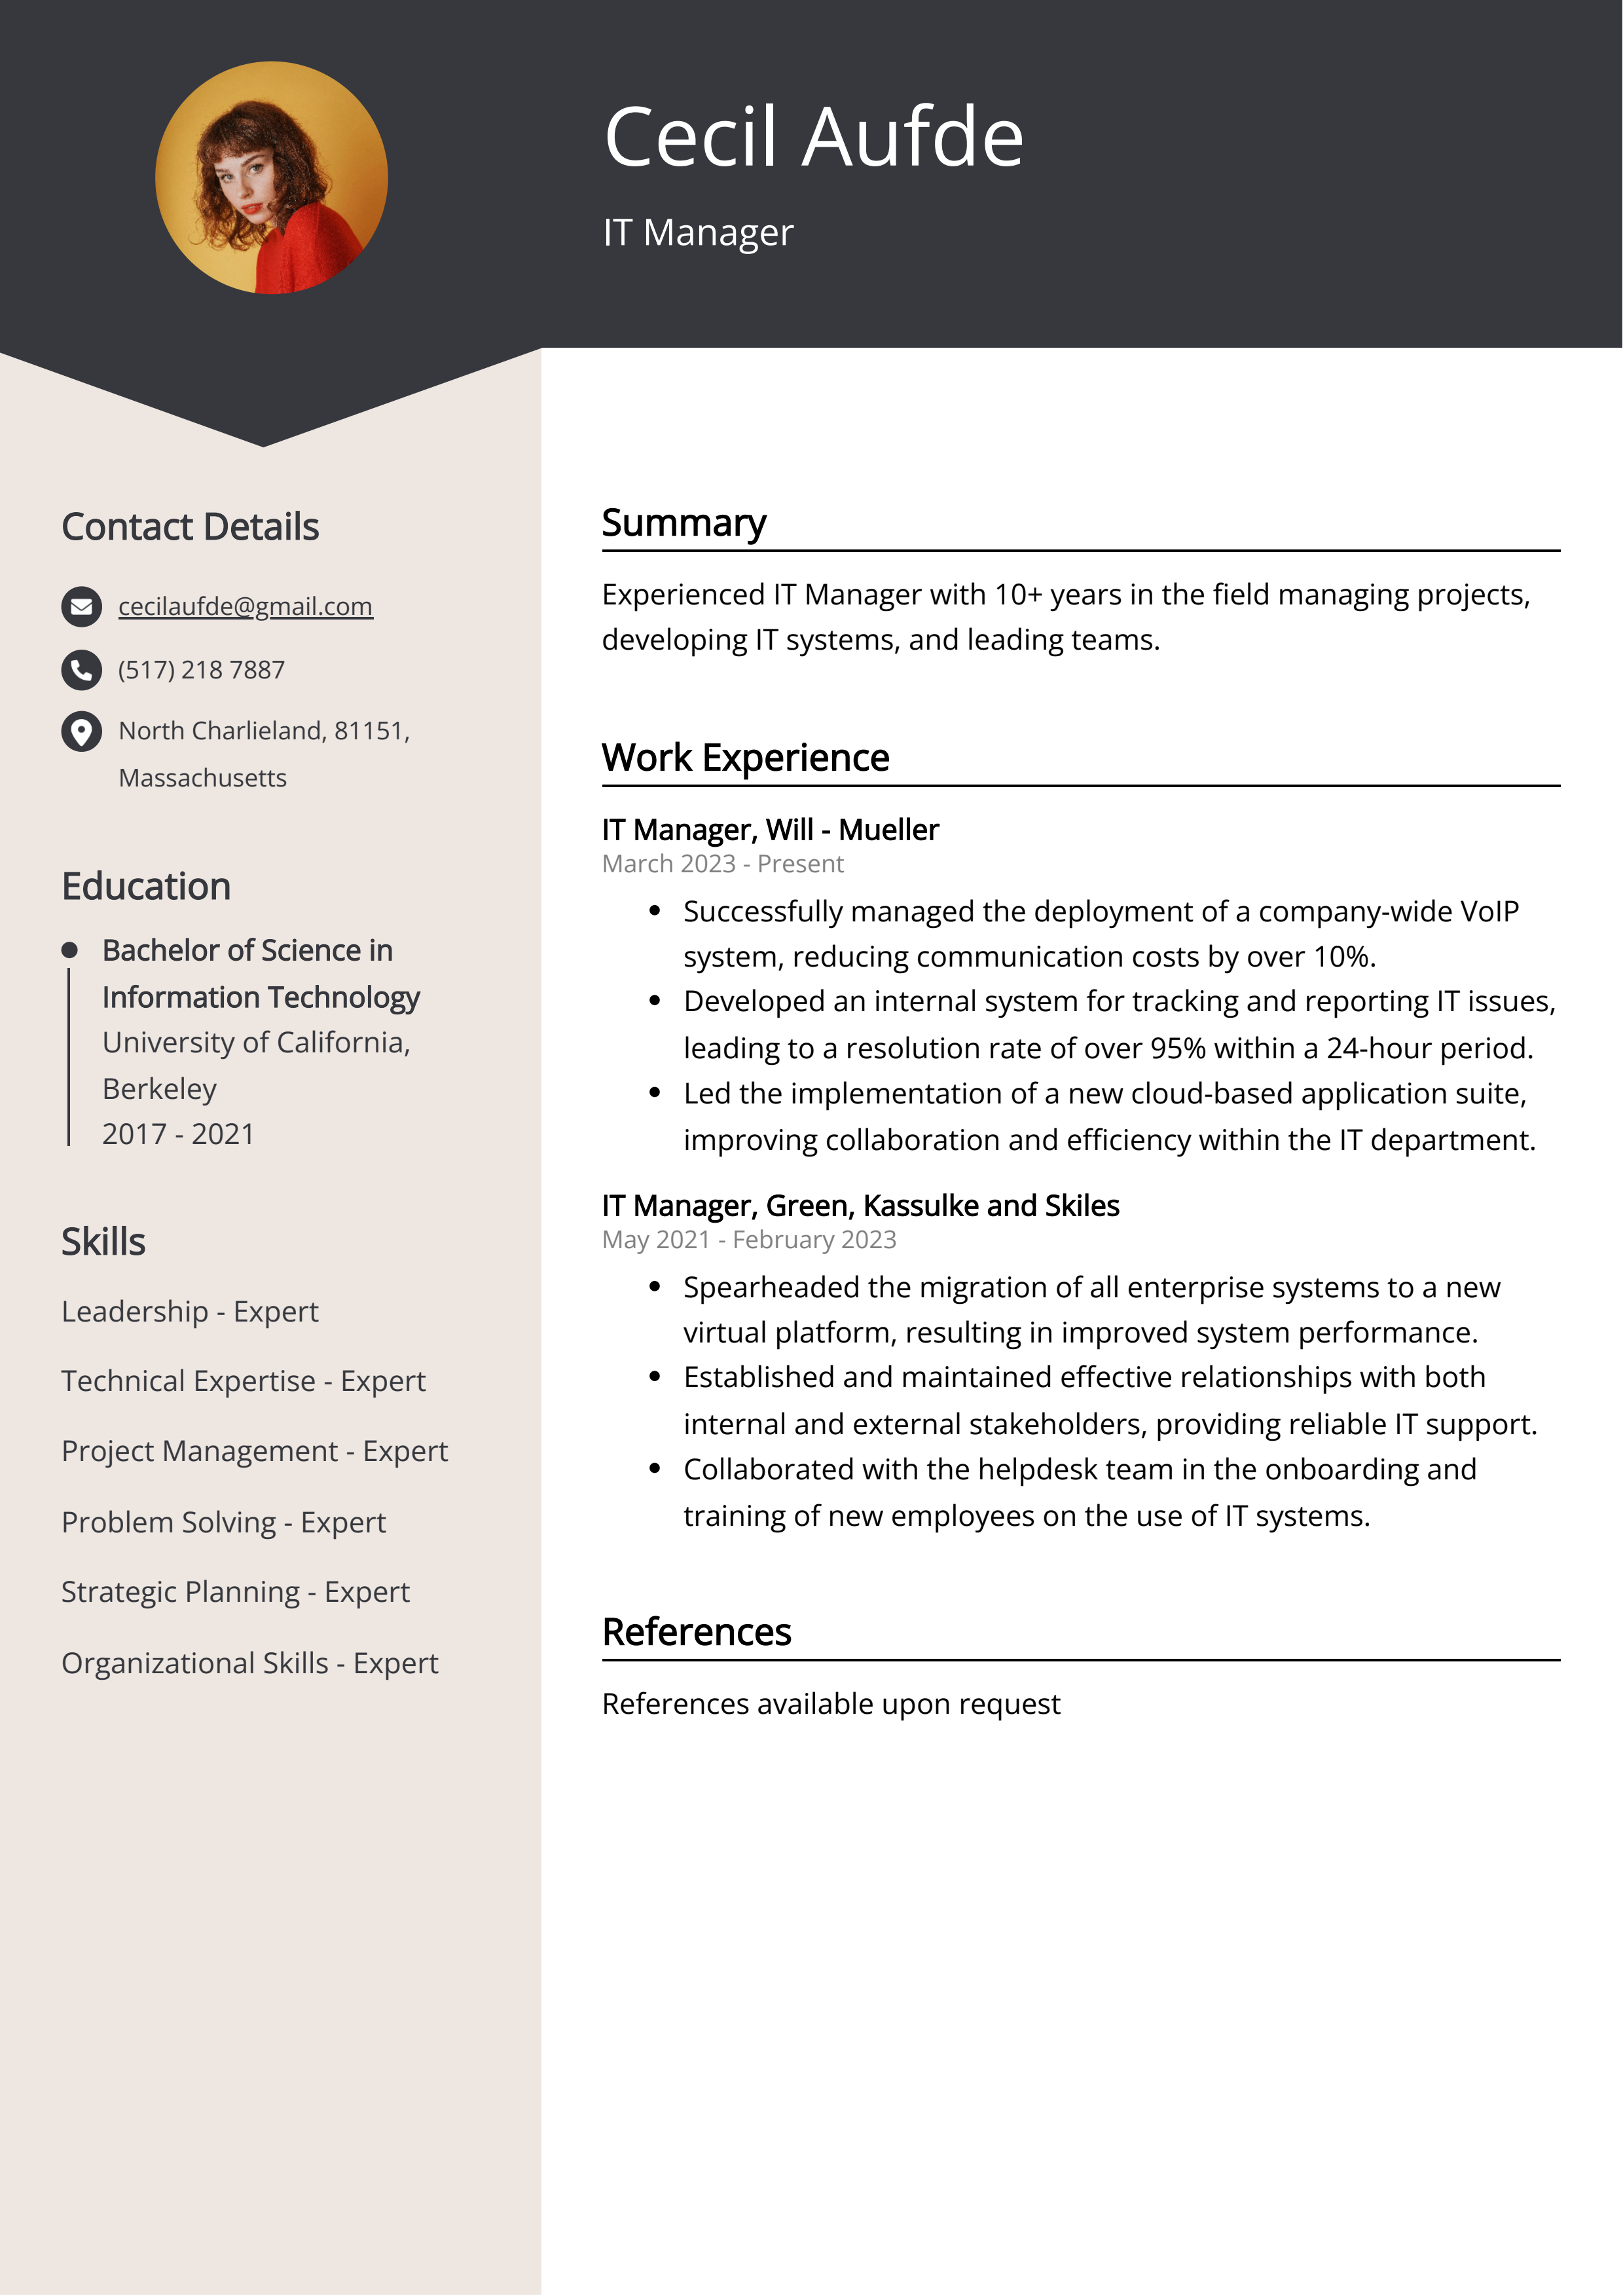 IT Manager CV Example